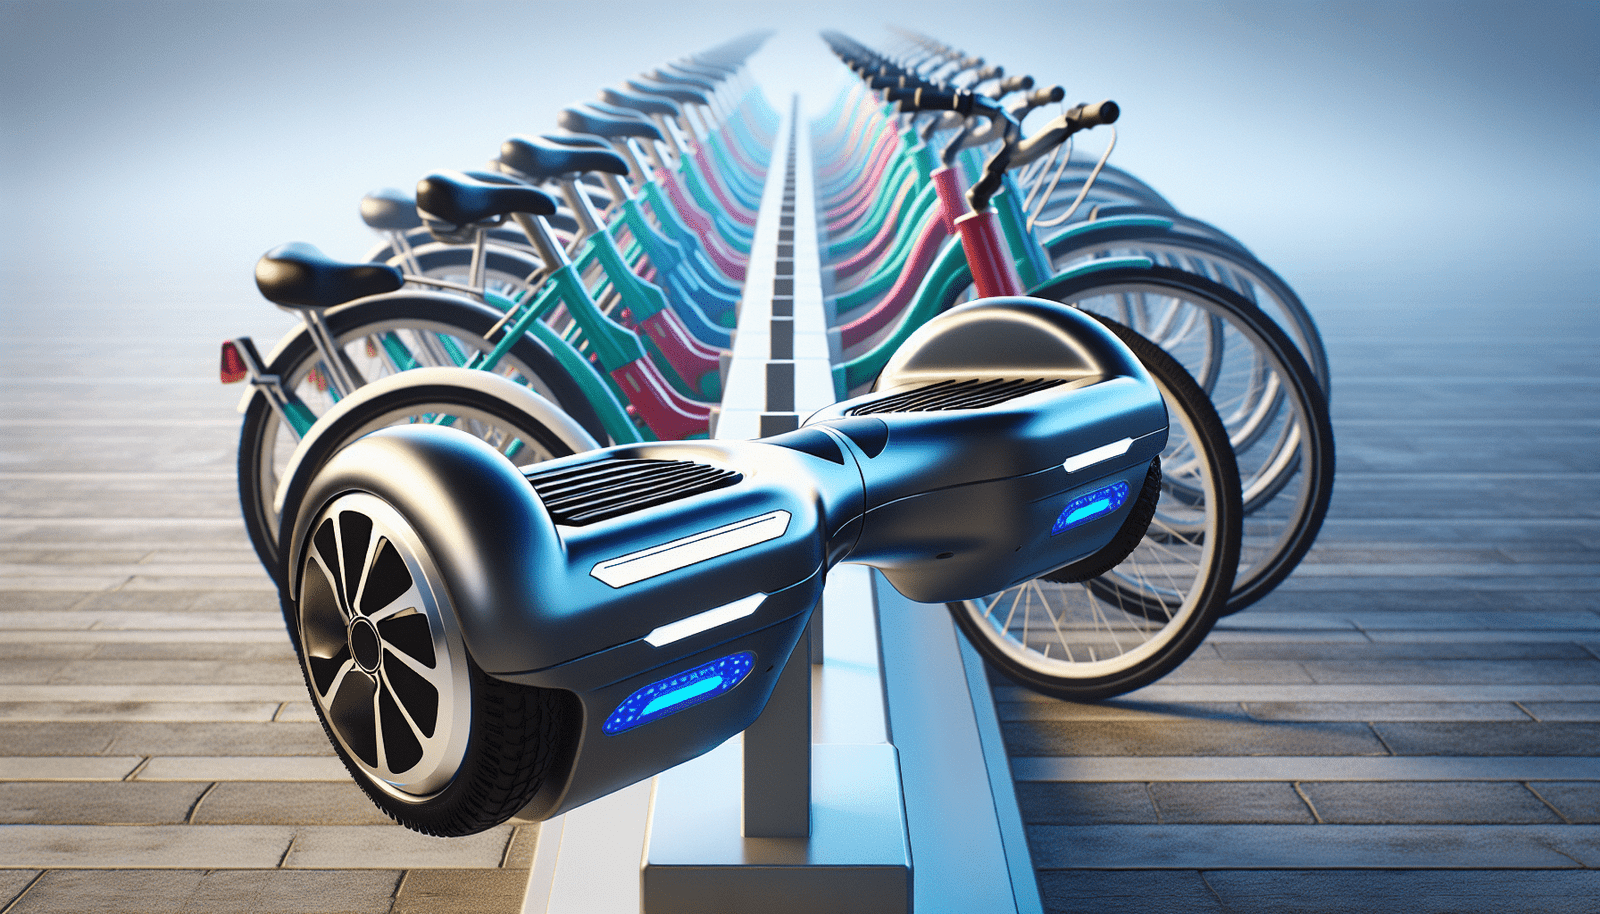 Can I Use A Hoverboard In Bike-sharing Programs?